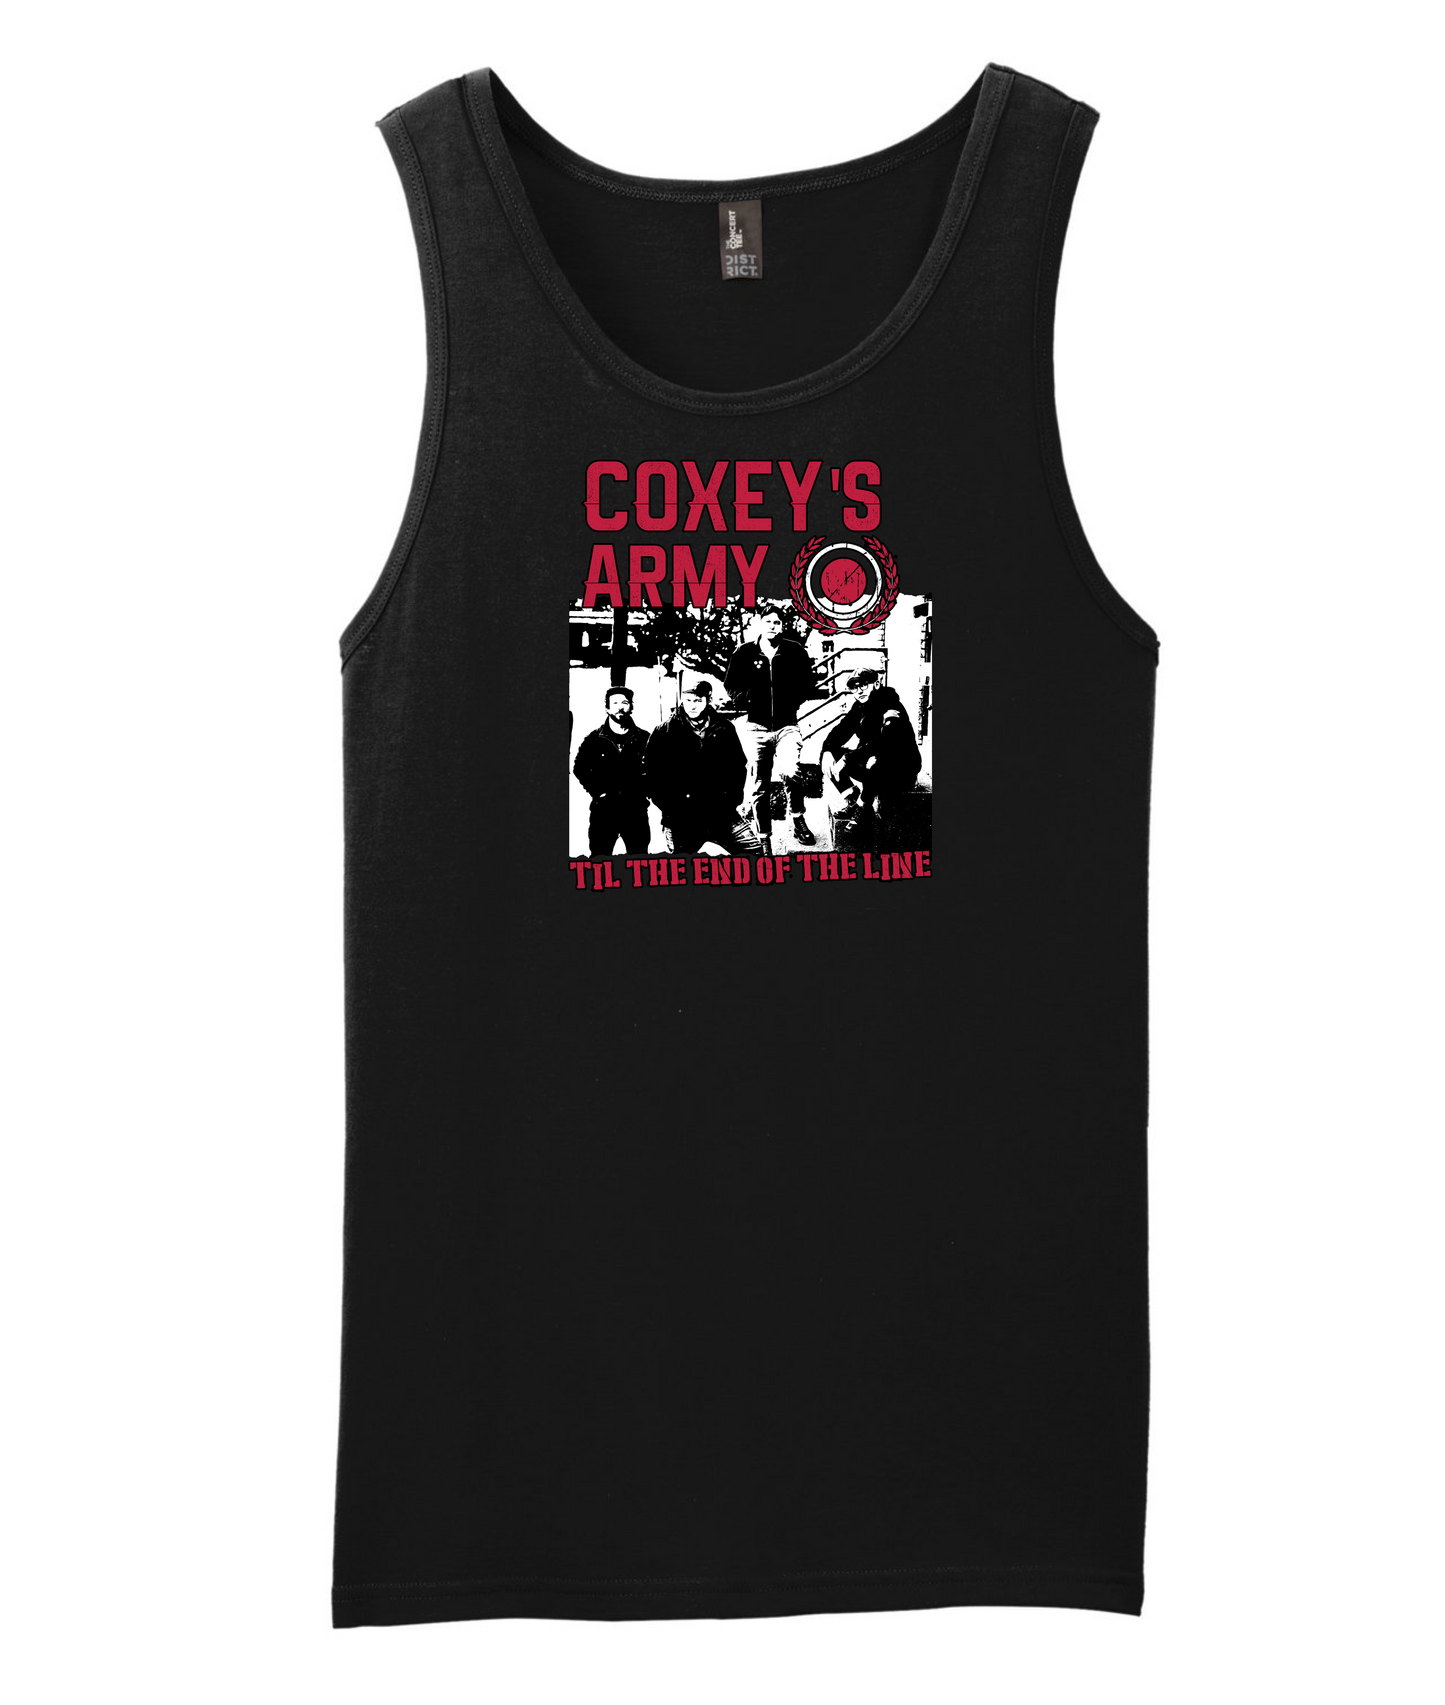 The Coxey's Army Virtual Merch Table - Til The End Of The Line - Black Tank Top